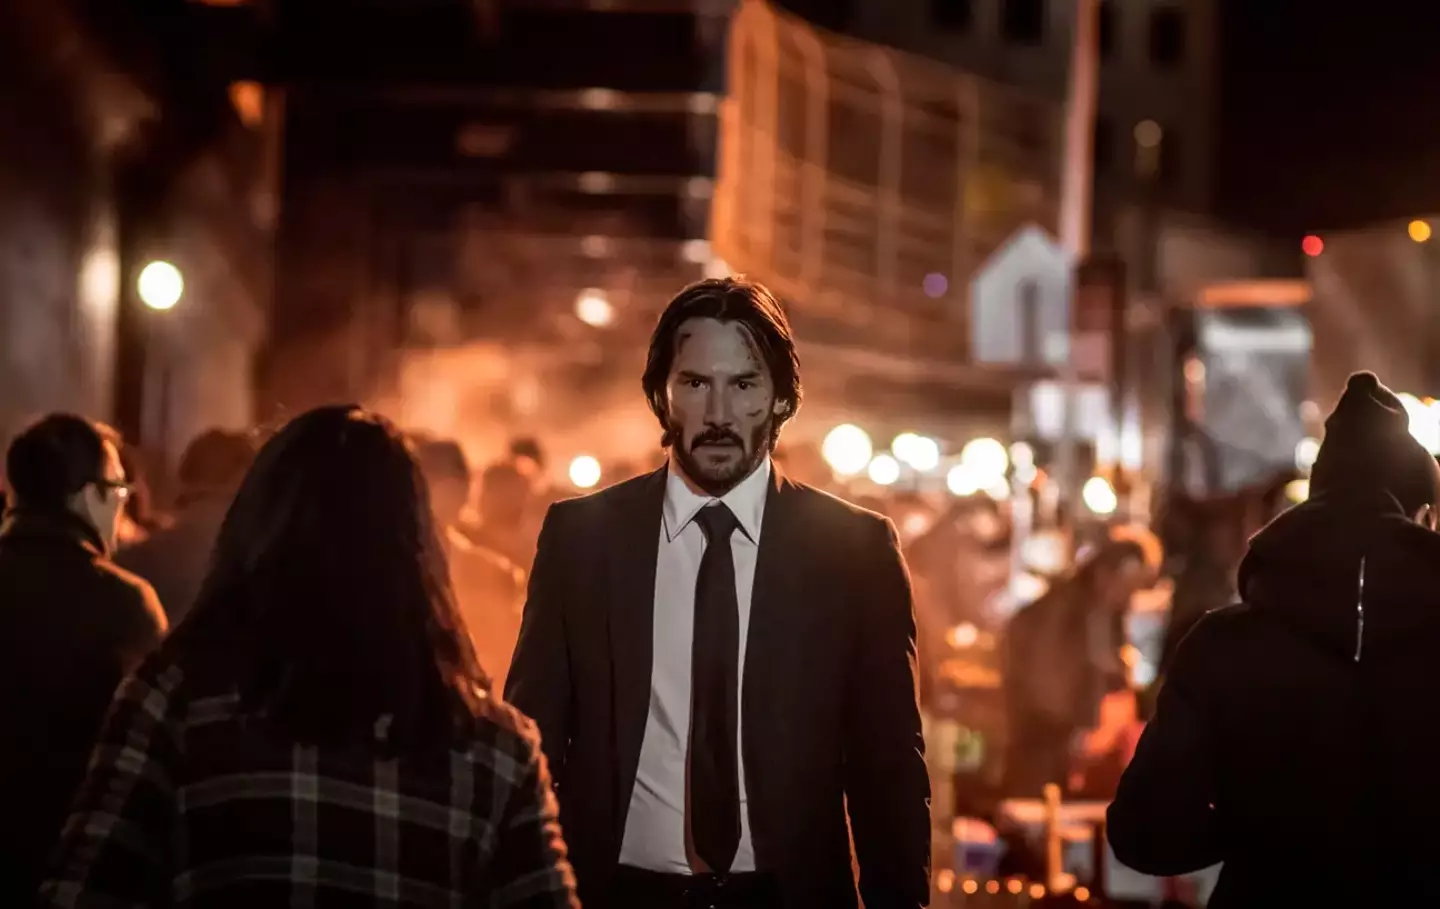 The John Wick flicks are some of the all-time greatest action movies to ever grace the screen.